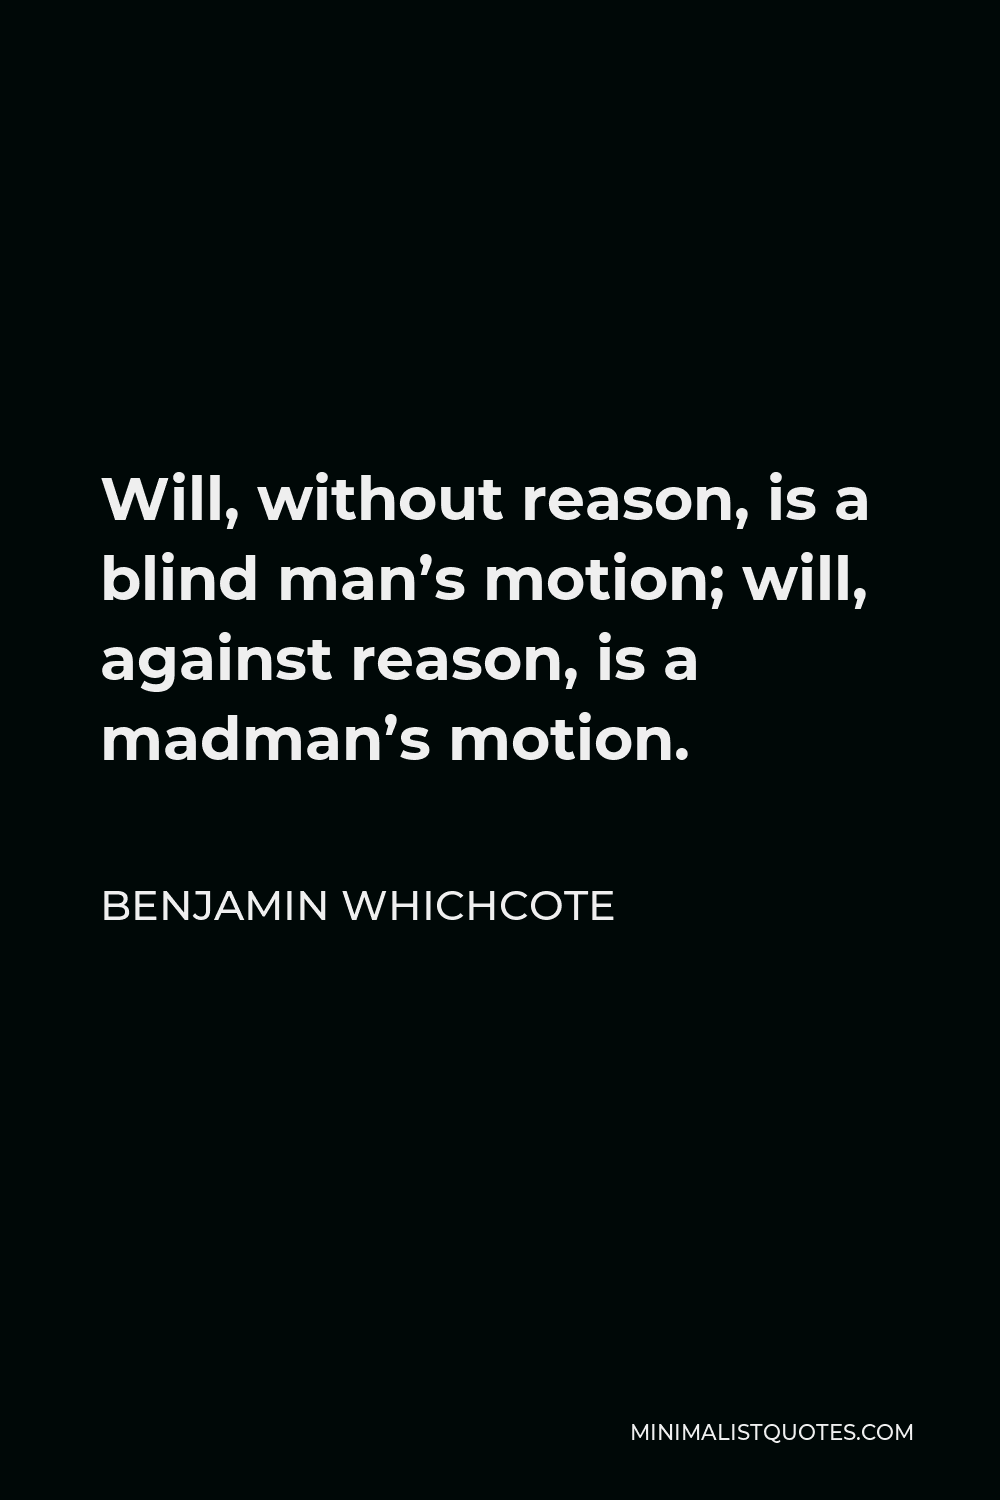 Benjamin Whichcote Quote - Will, without reason, is a blind man’s motion; will, against reason, is a madman’s motion.